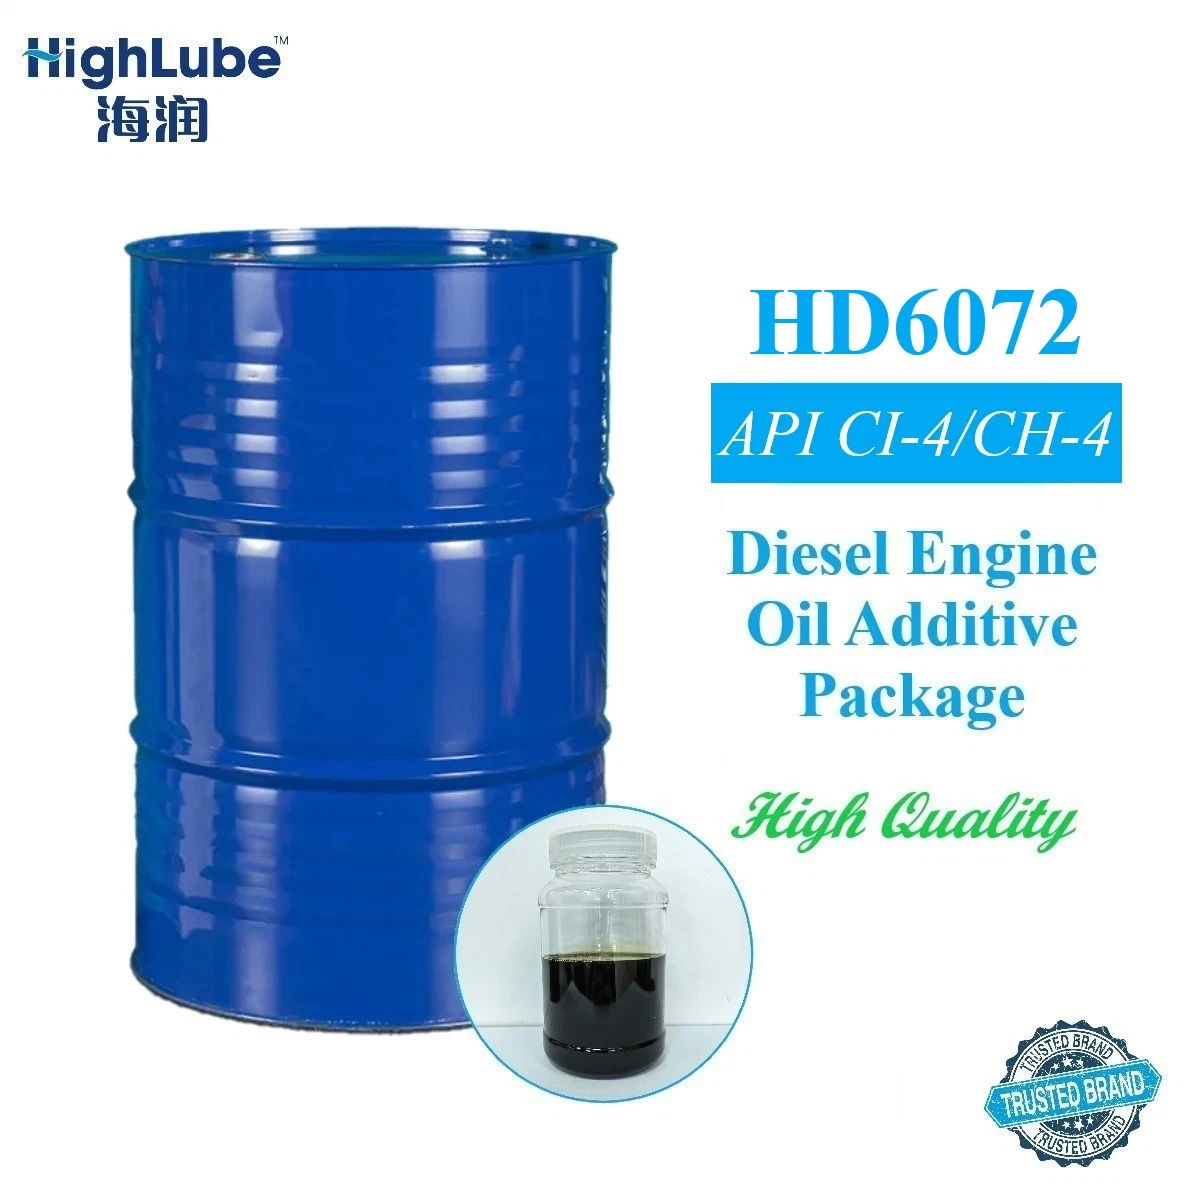 Diesel Engine Oil Additive Package, API Ci-4/CH-4 Lubricant Additive